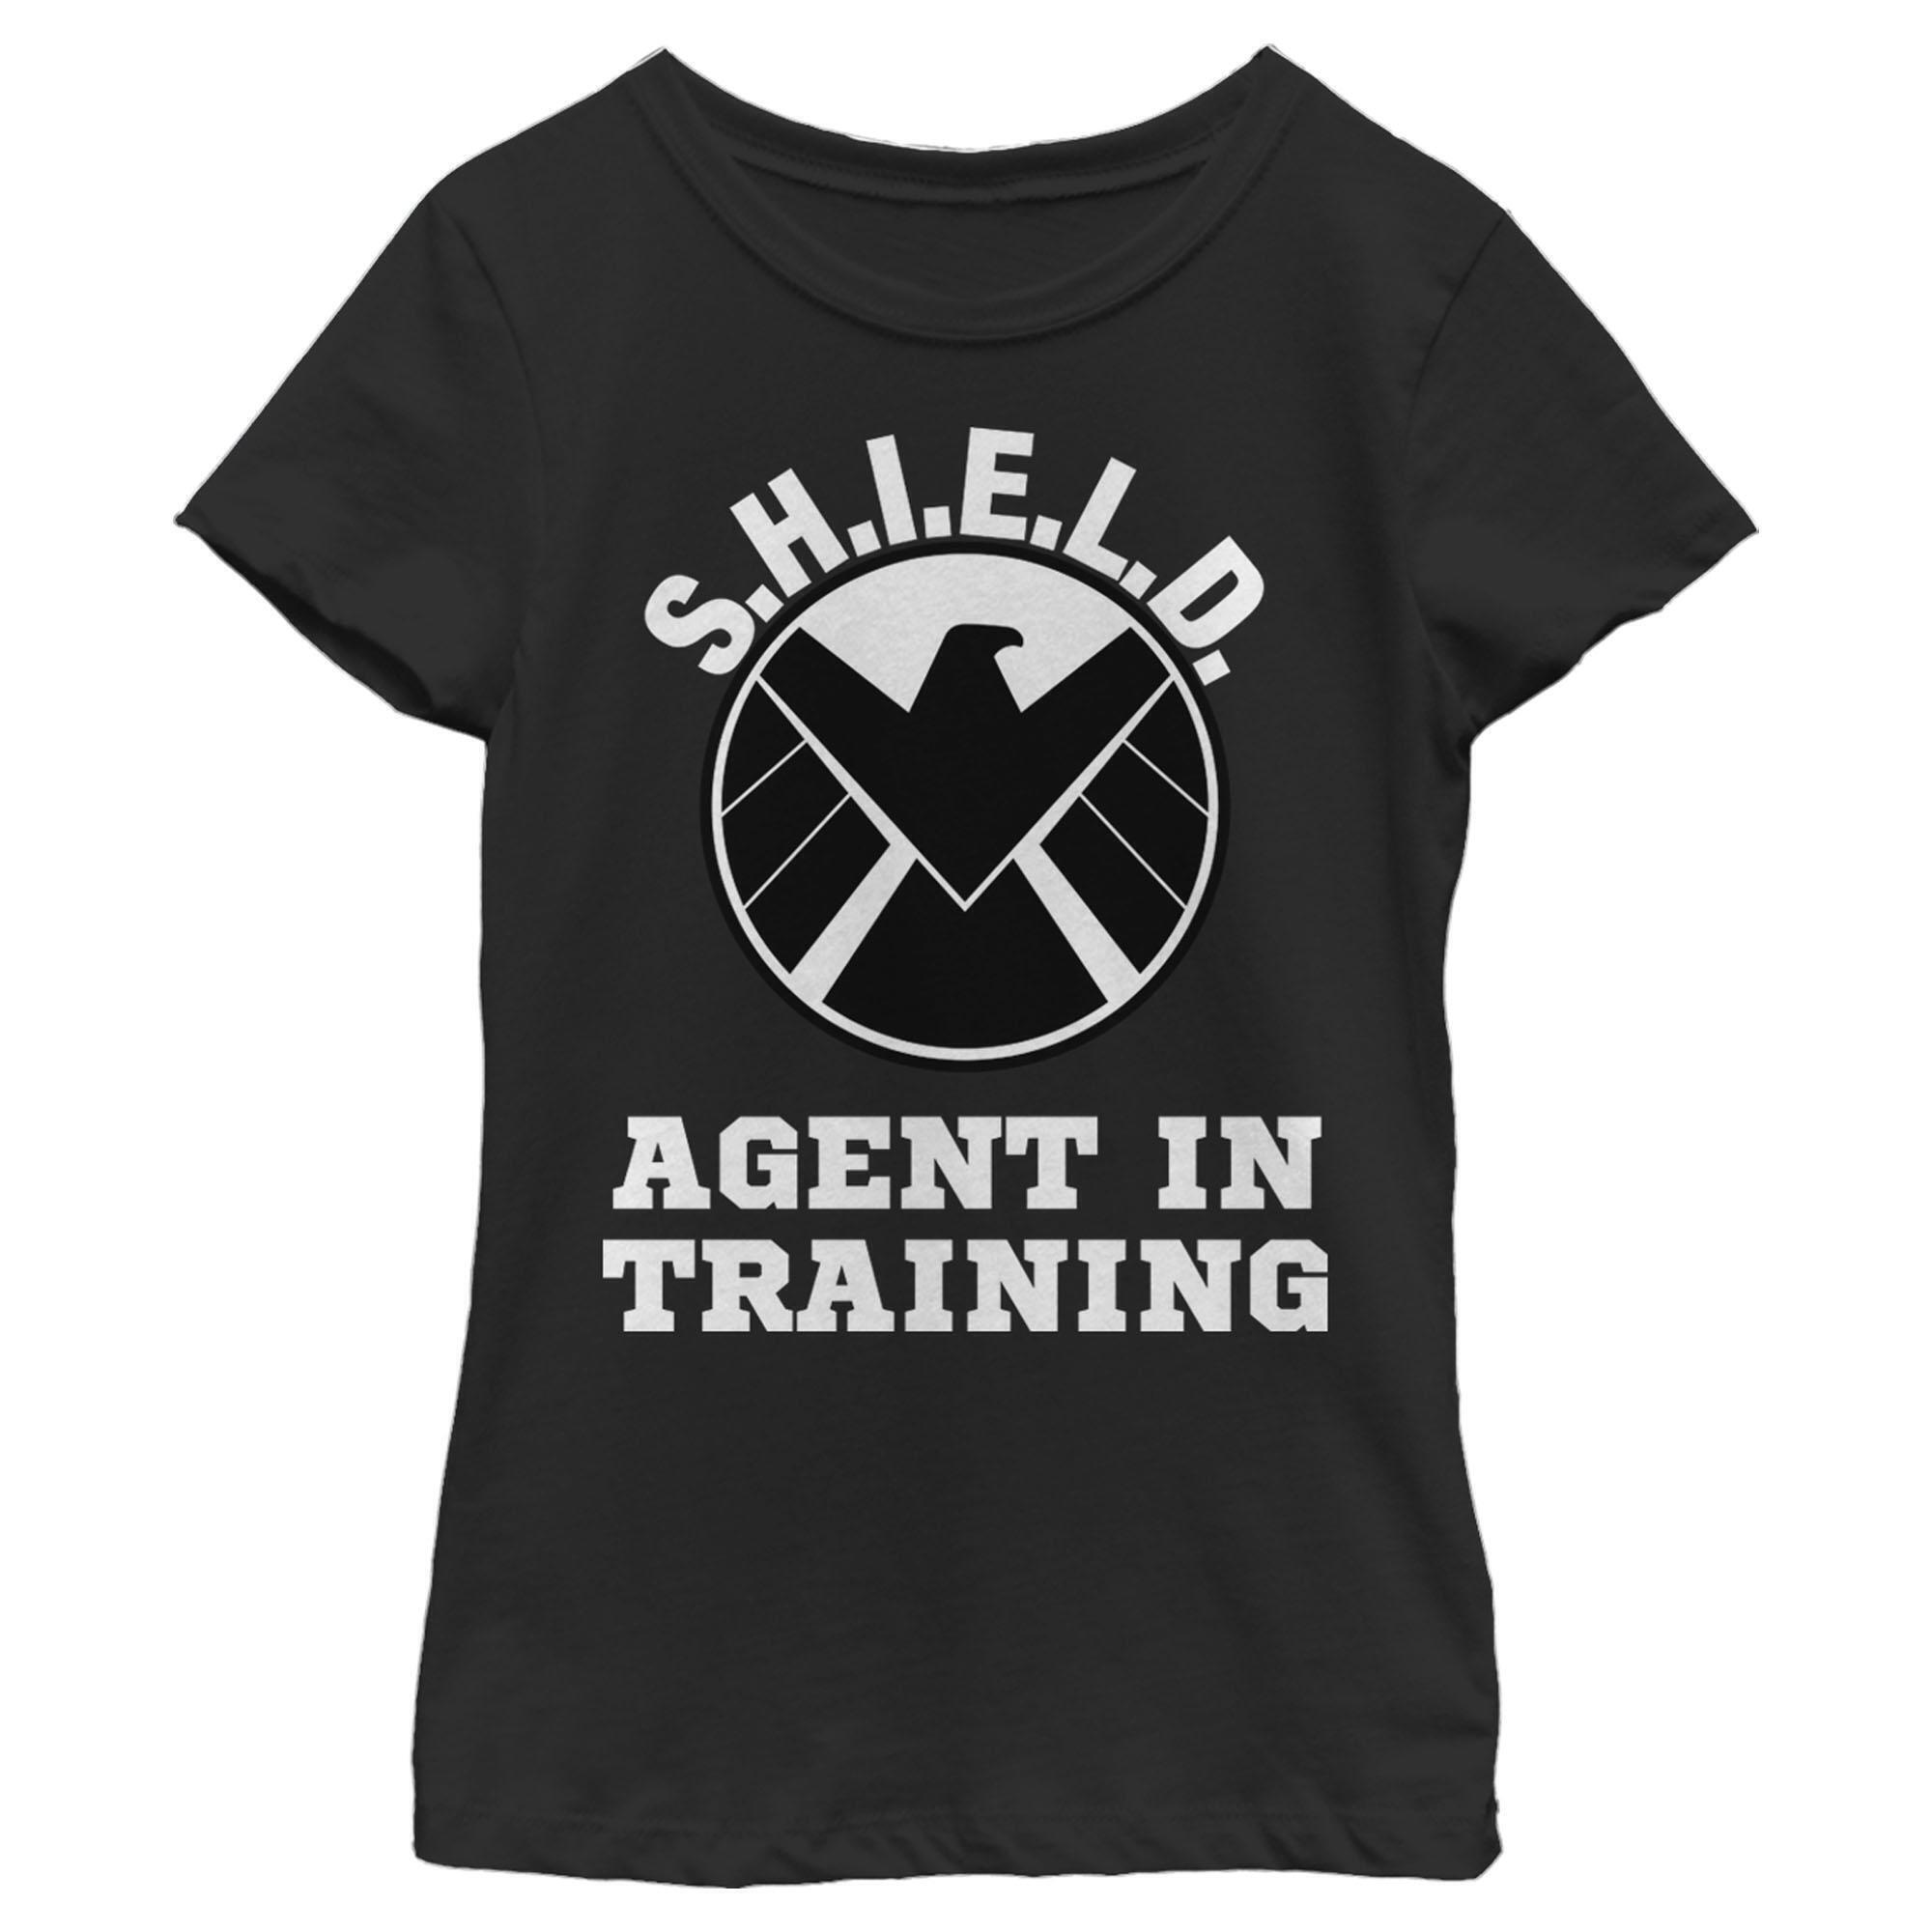 Girl's Marvel SHIELD Agent in Training Graphic T-Shirt